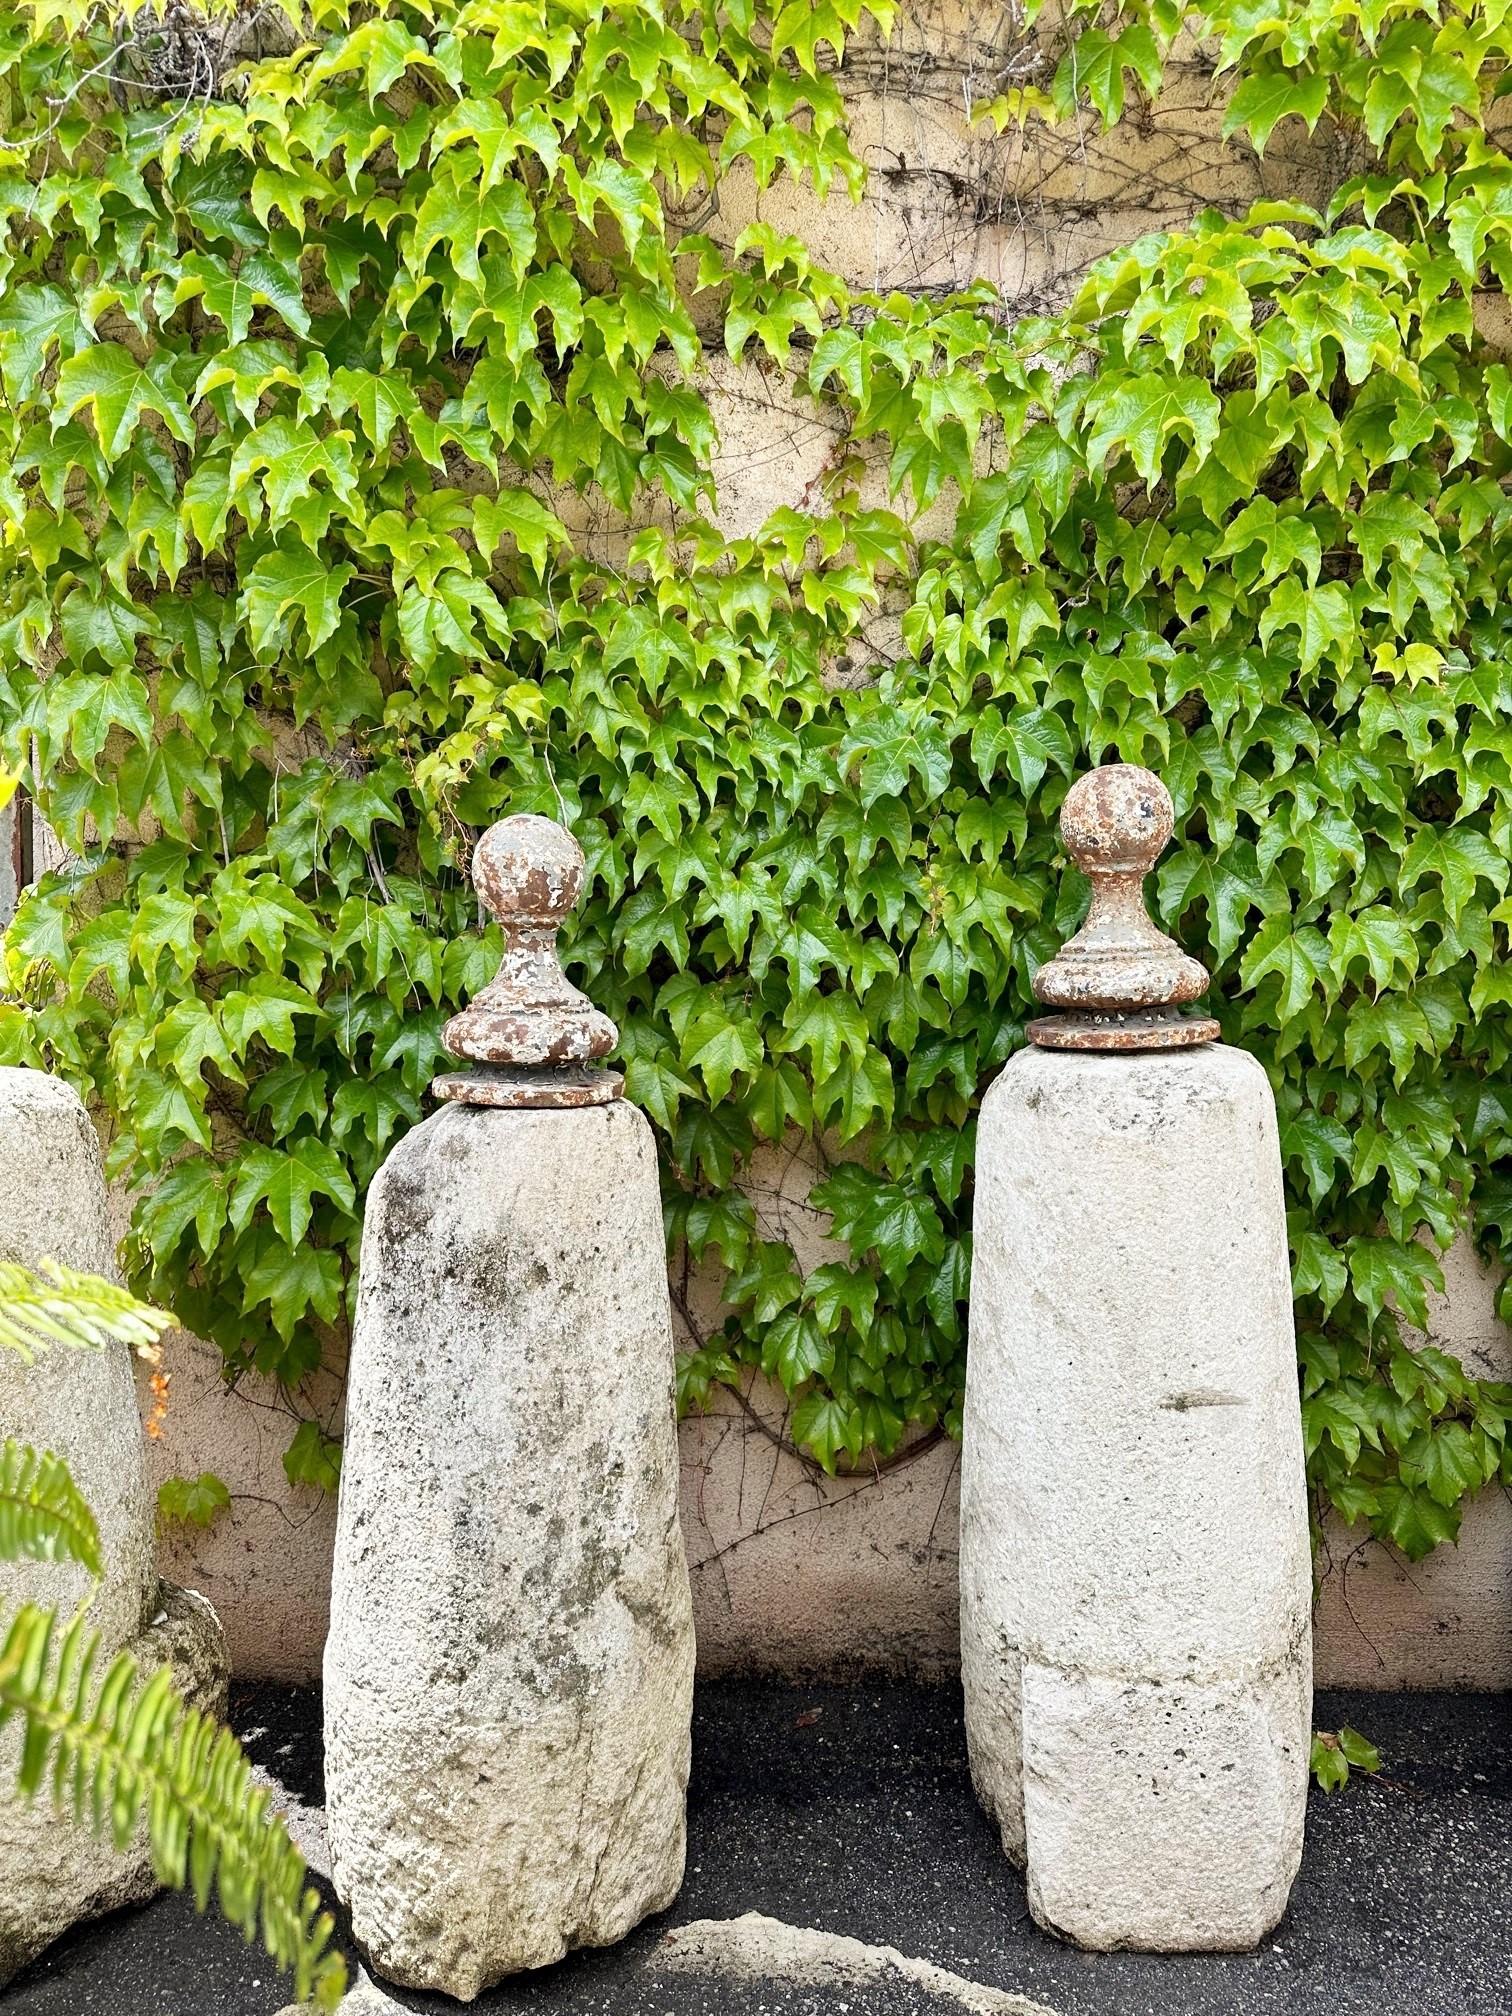 Metal Ball Finials Garden Entrance Post Round Spherical Antique Decorative LA CA . A beautiful 19th century cast metal garden finials, to mount on garden posts flanking each side of a gate or simply using them as beautiful decorative elements in an